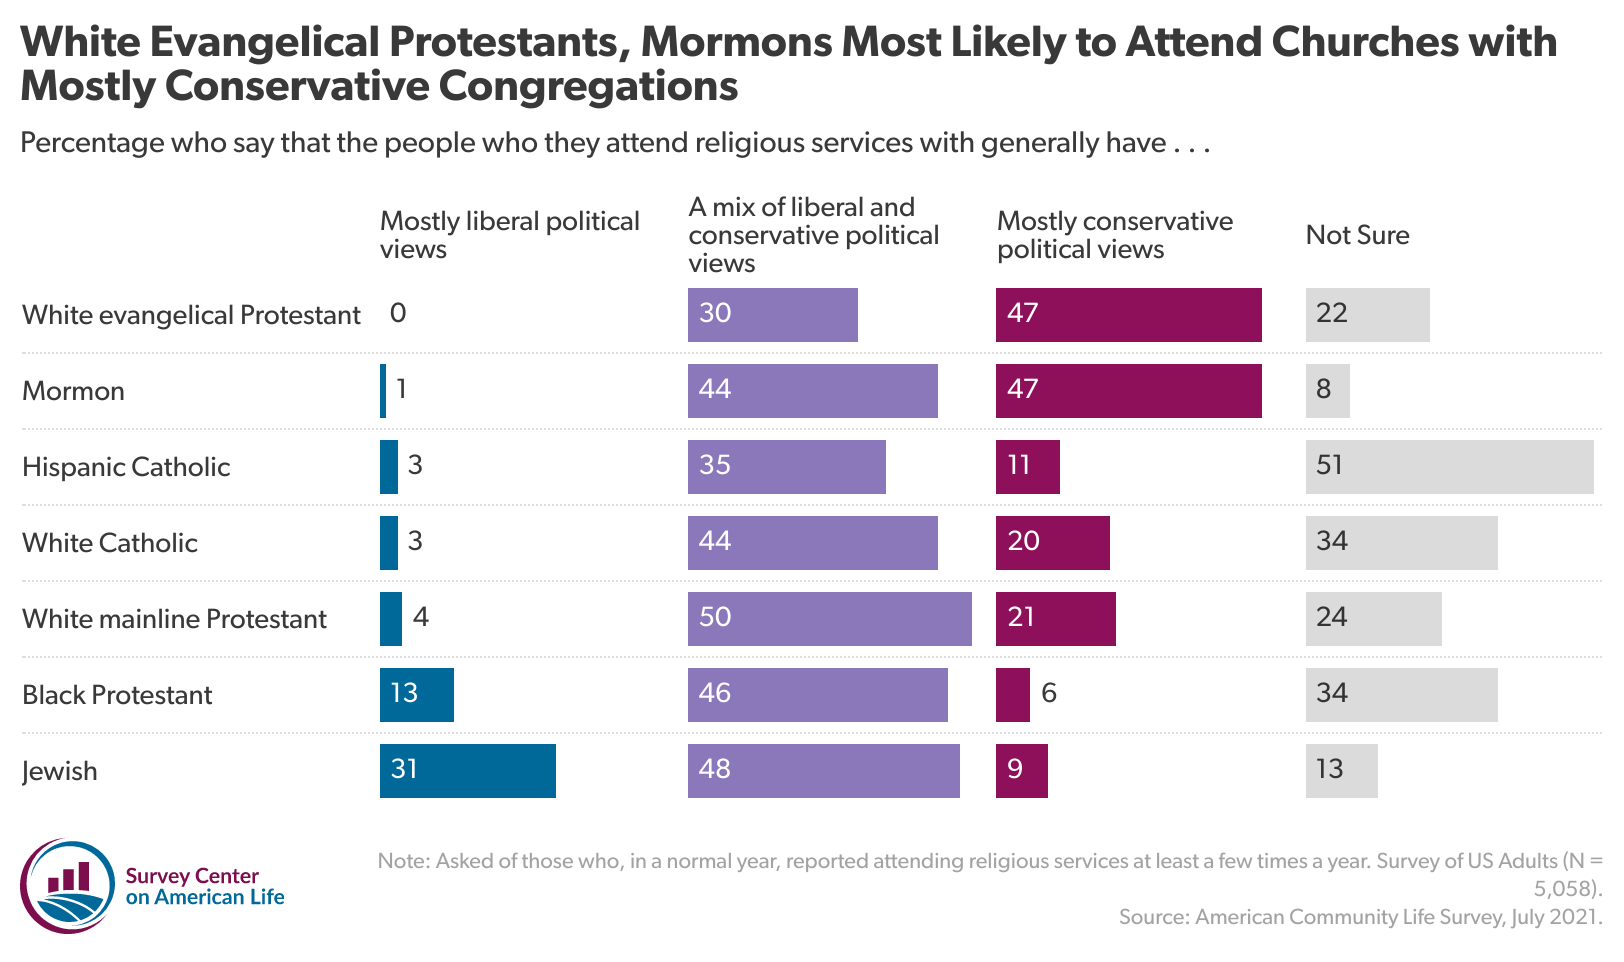 Chart showing percentage who say that the people who they attend religious services with generally have certain political views.